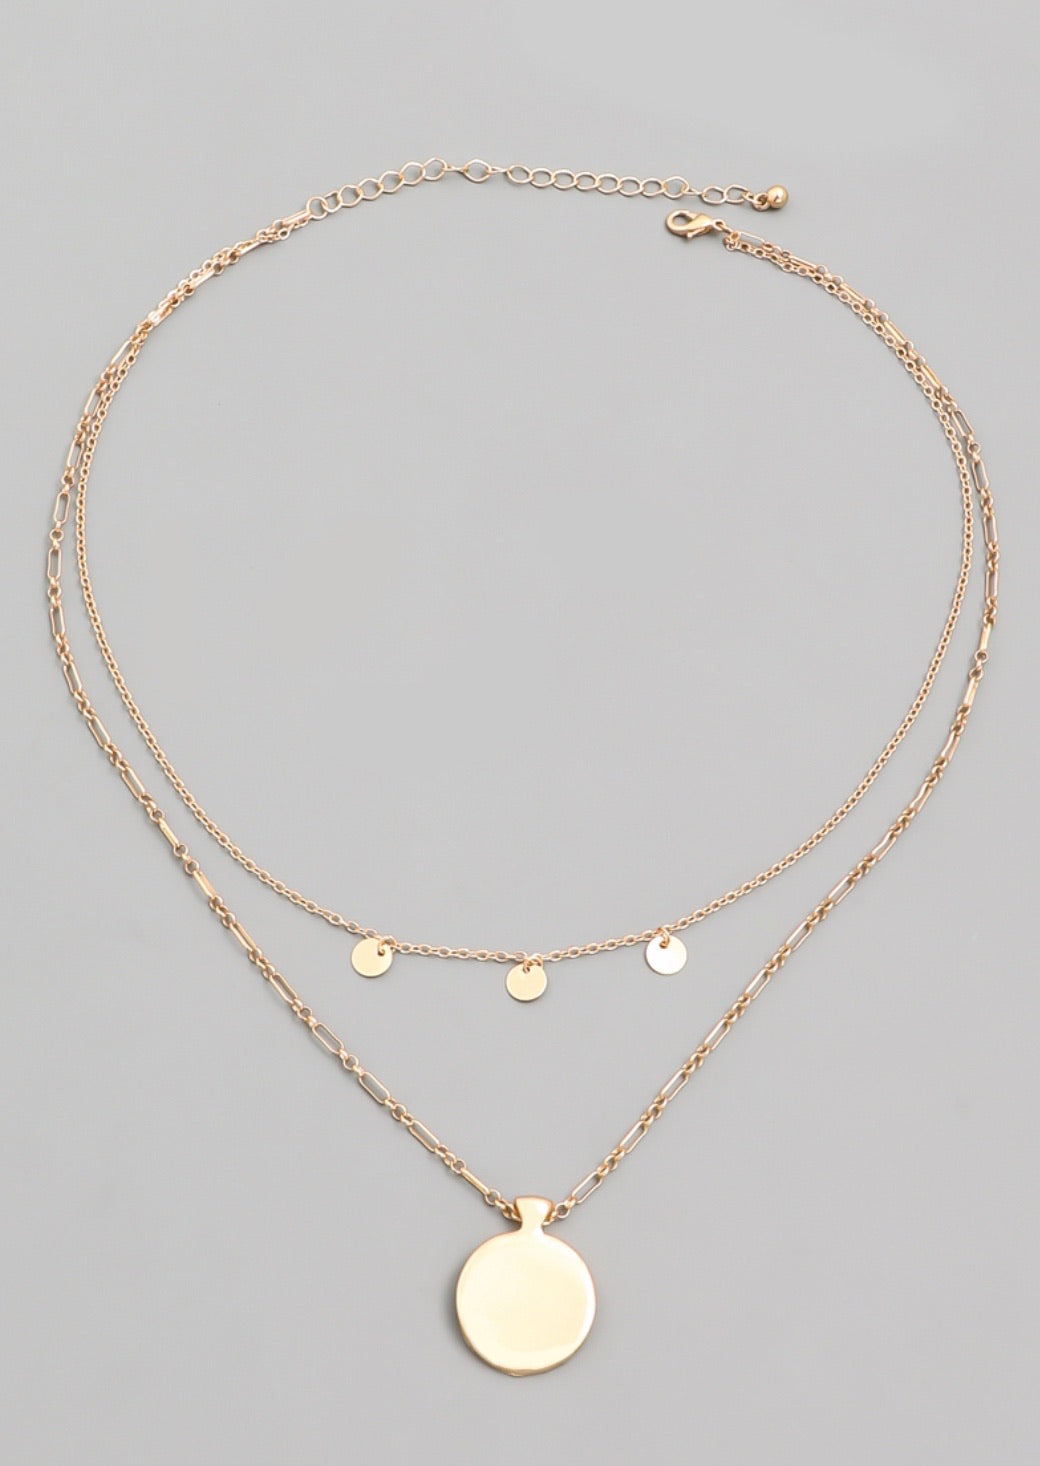 Layered Dainty Coin Pendant Necklace